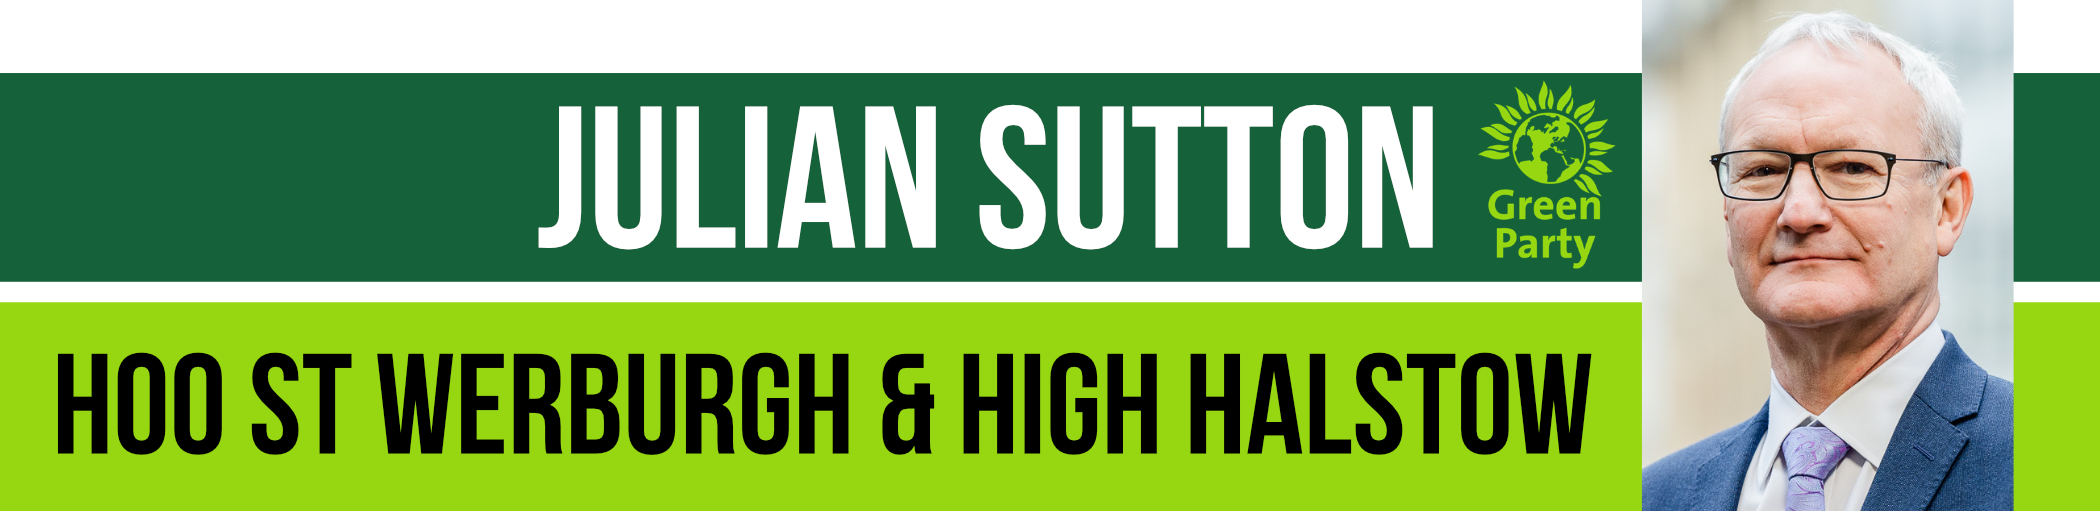 Julilan Sutton is our Green candidate for May 2023 local elections for Hoo St Werburgh and High Halstow on the Hoo Peninsula